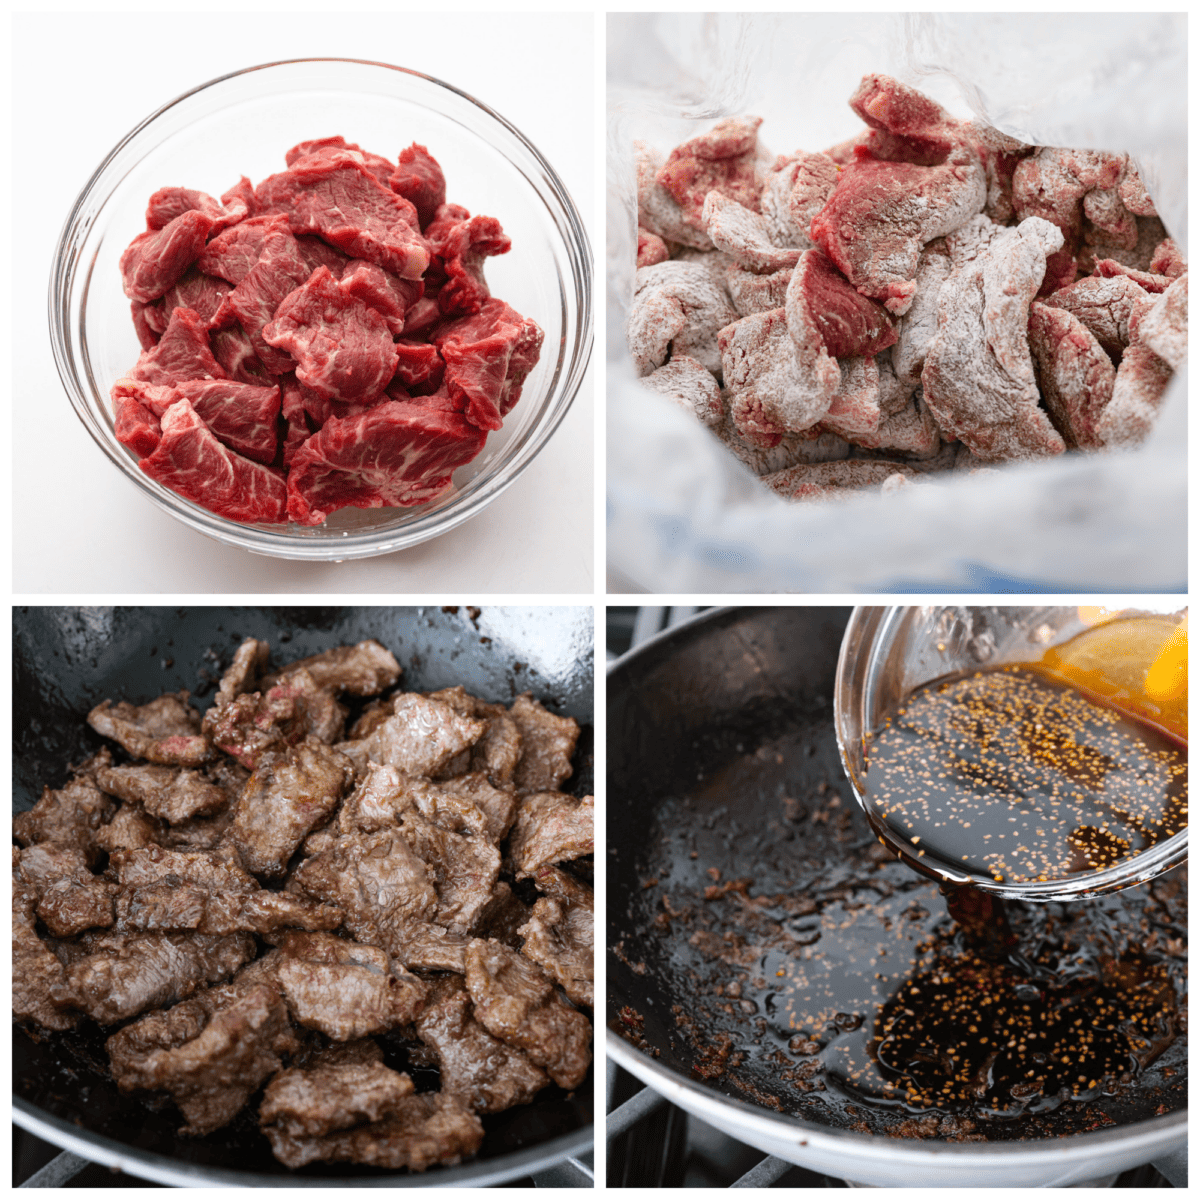 4-photo collage of beef being cooked and coated in a homemade sauce.